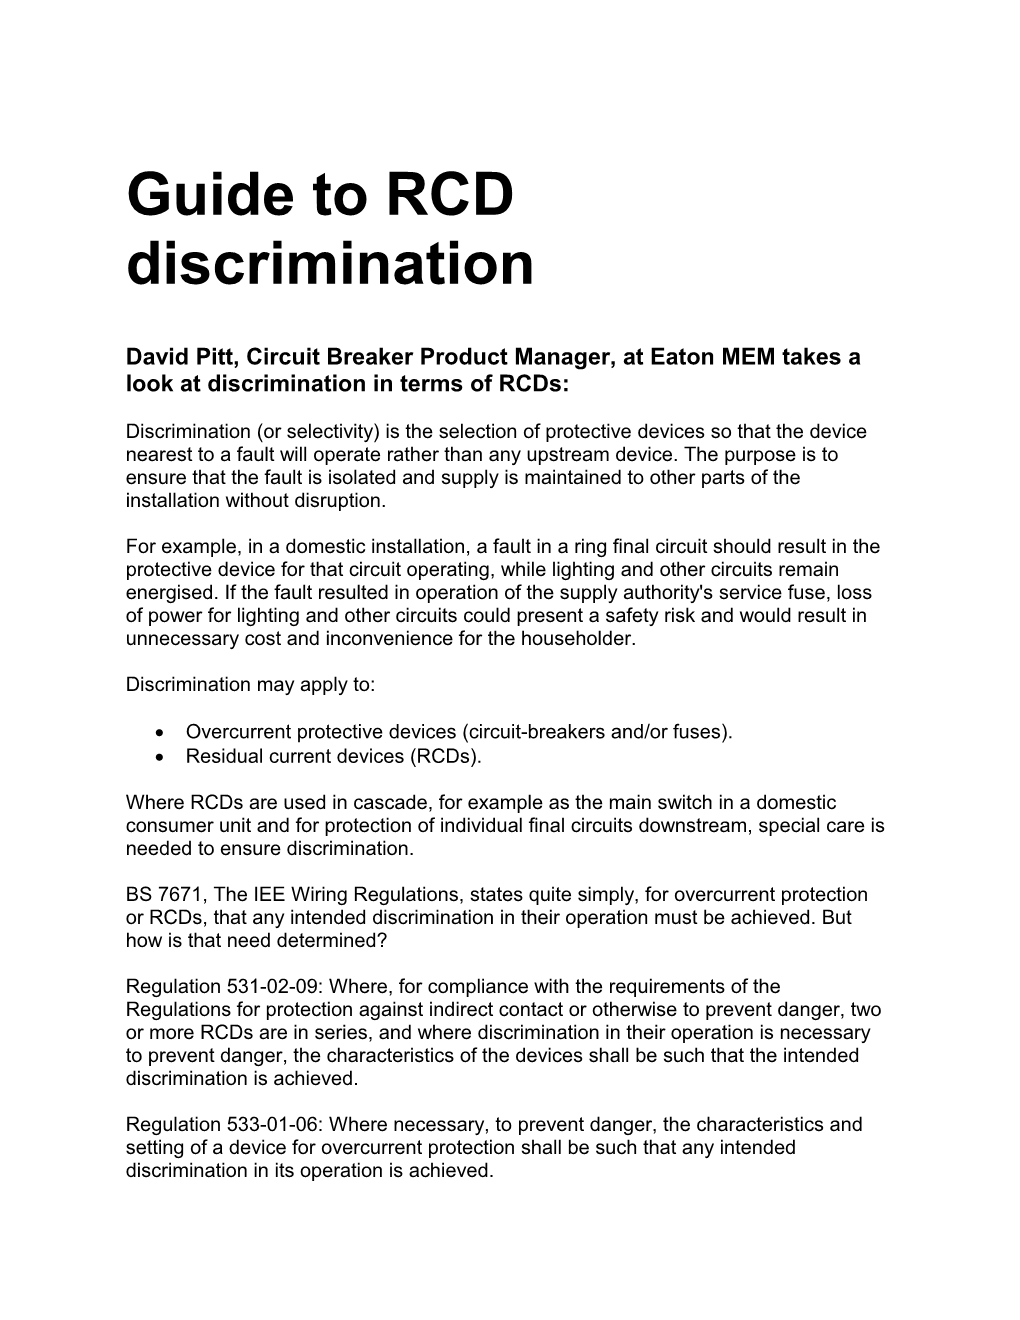 Guide to RCD Discrimination